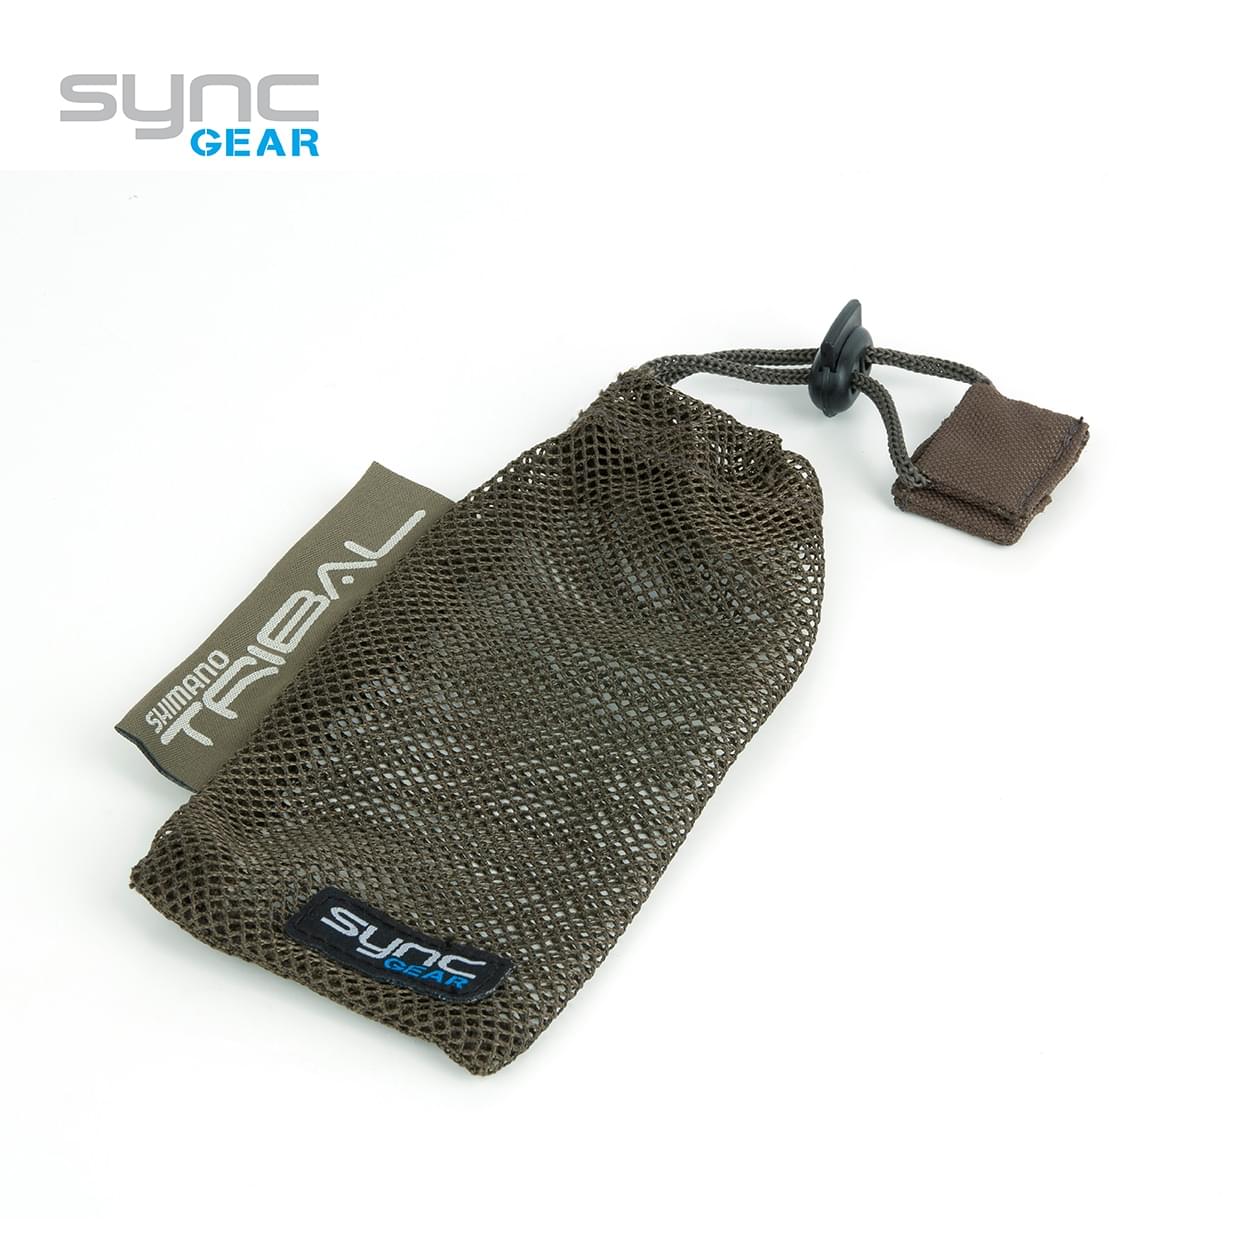 Shimano Sync Gear Magnetic Pouch